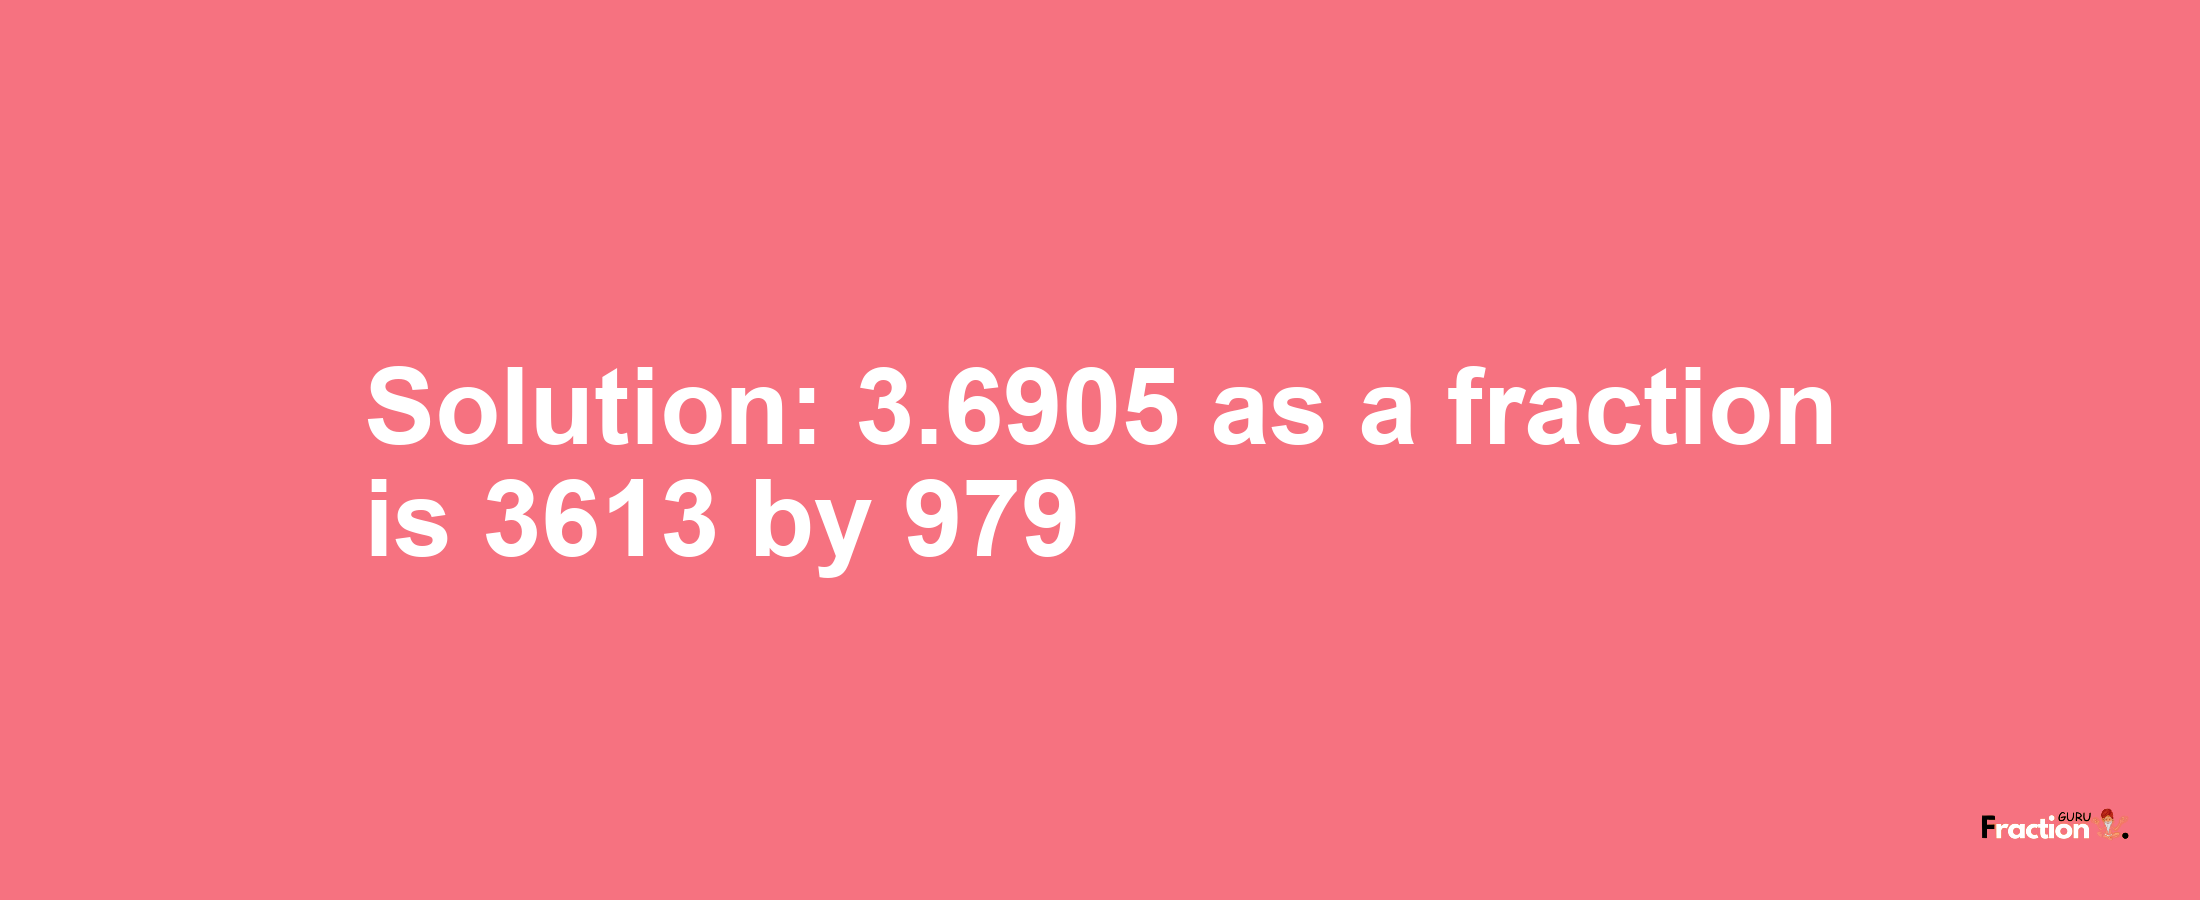 Solution:3.6905 as a fraction is 3613/979